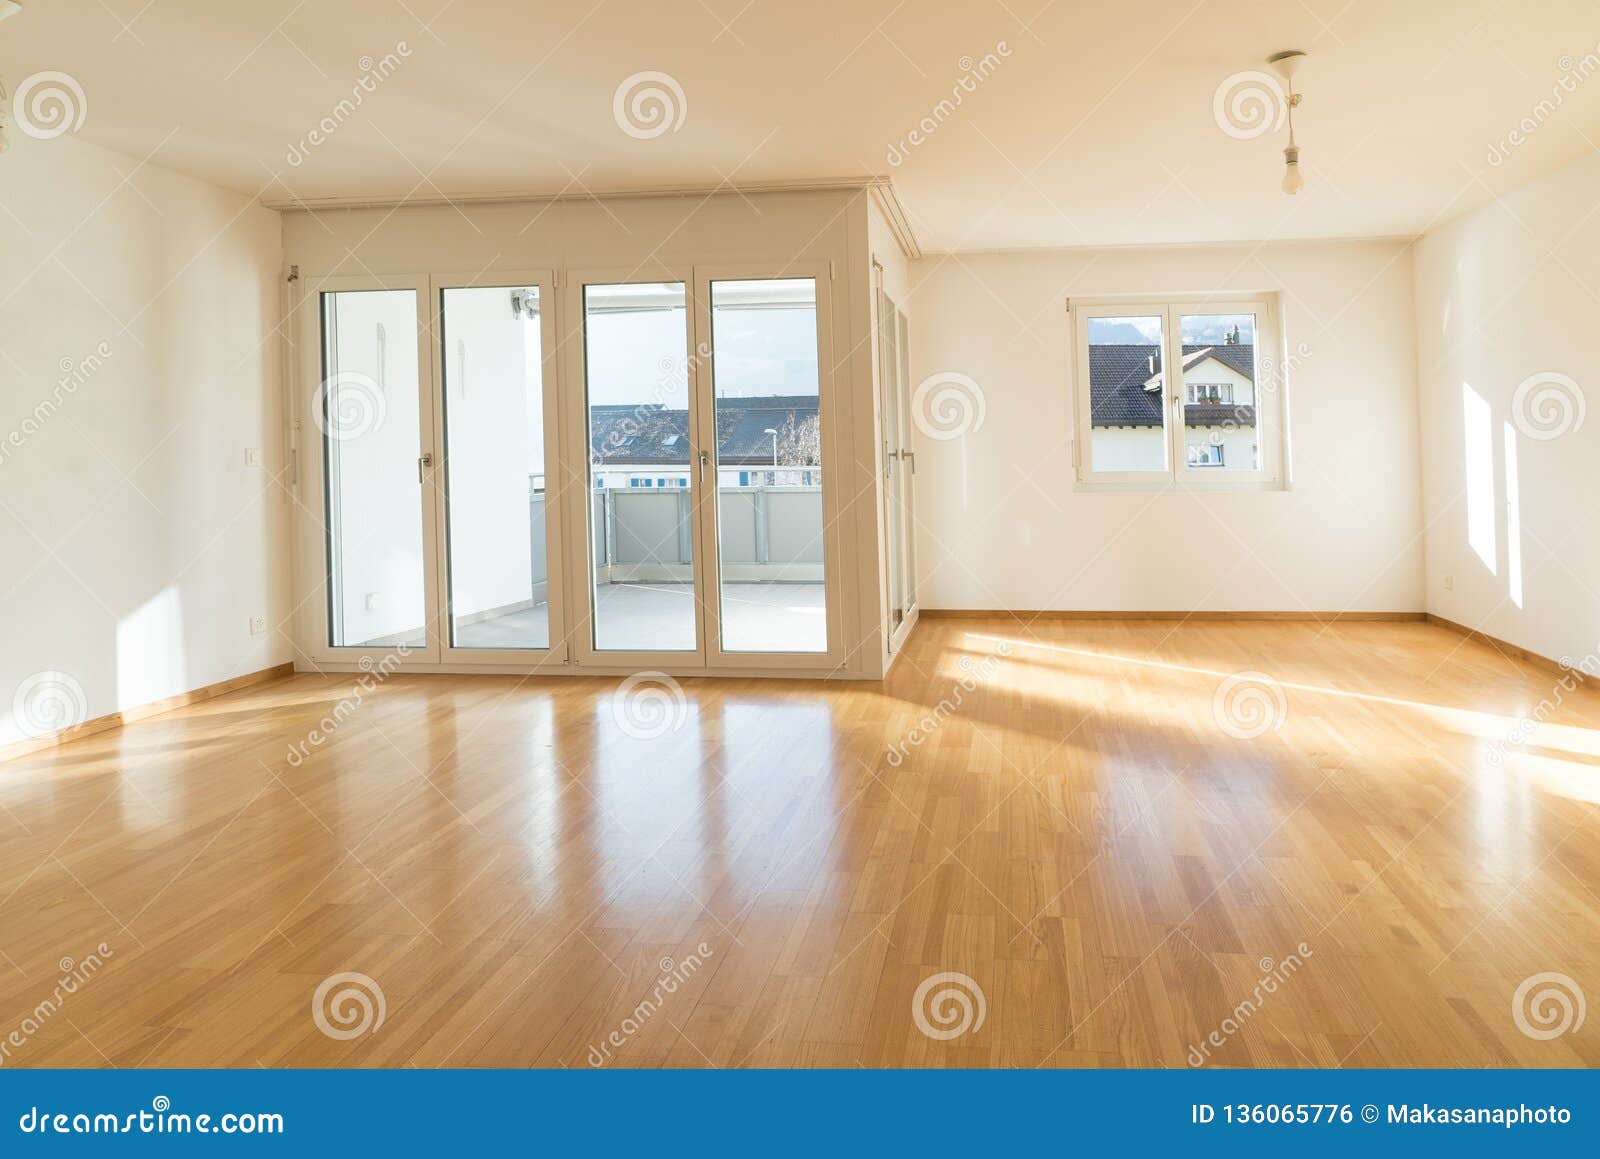 bright new living room in an empty apartment with french doors and parquet wooden floors